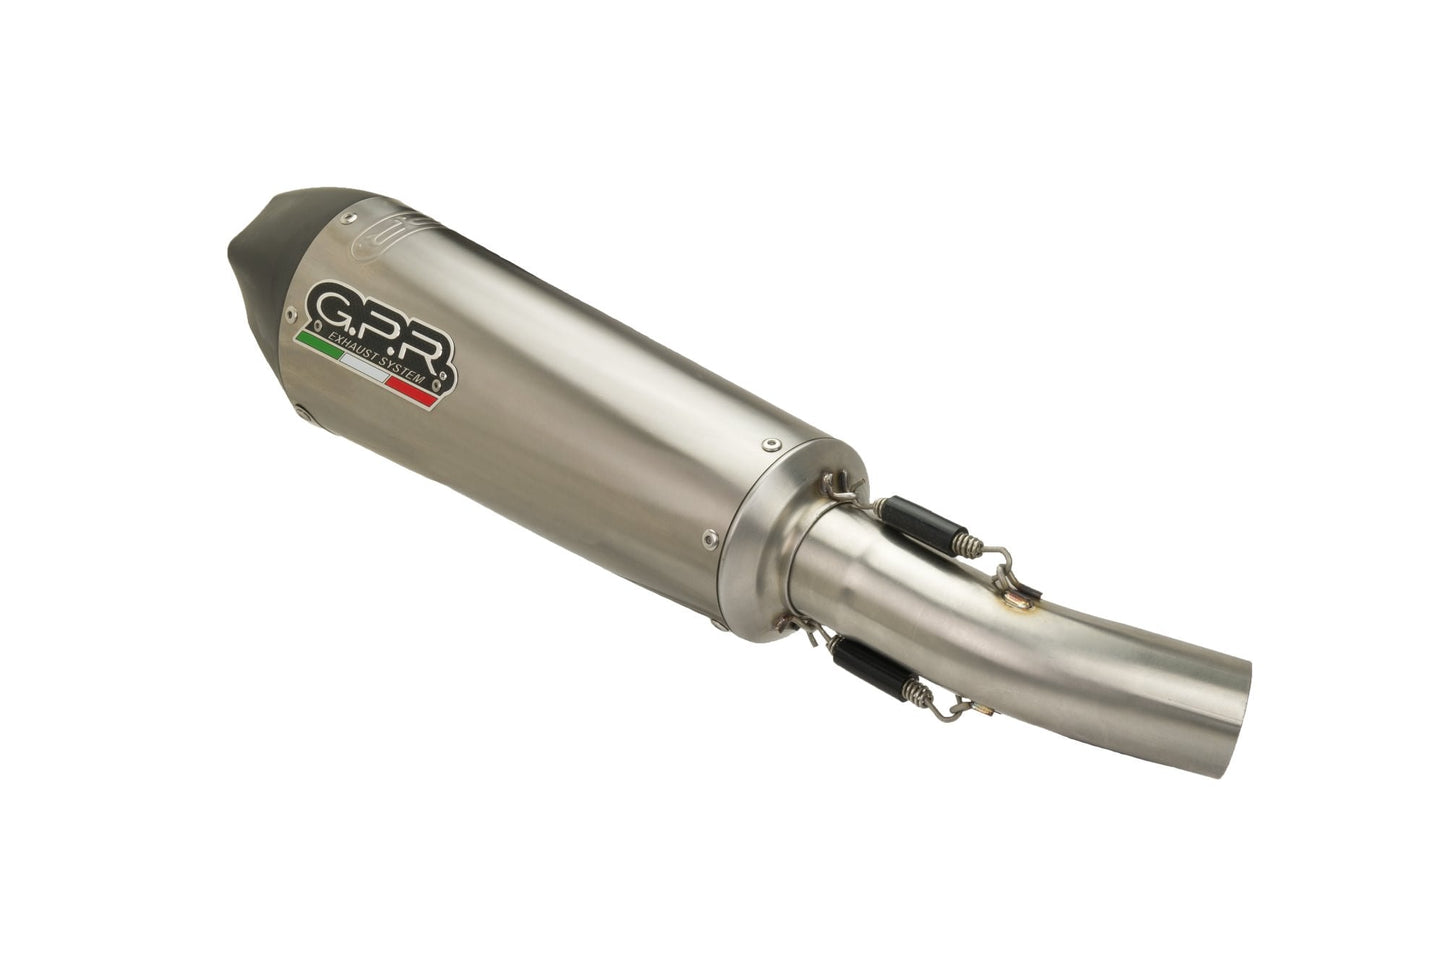 GPR Exhaust System Yamaha XSR900 2016-2020, Gpe Ann. titanium, Full System Exhaust, Including Removable DB Killer  E4.CO.Y.186.DBHOM.GPAN.TO